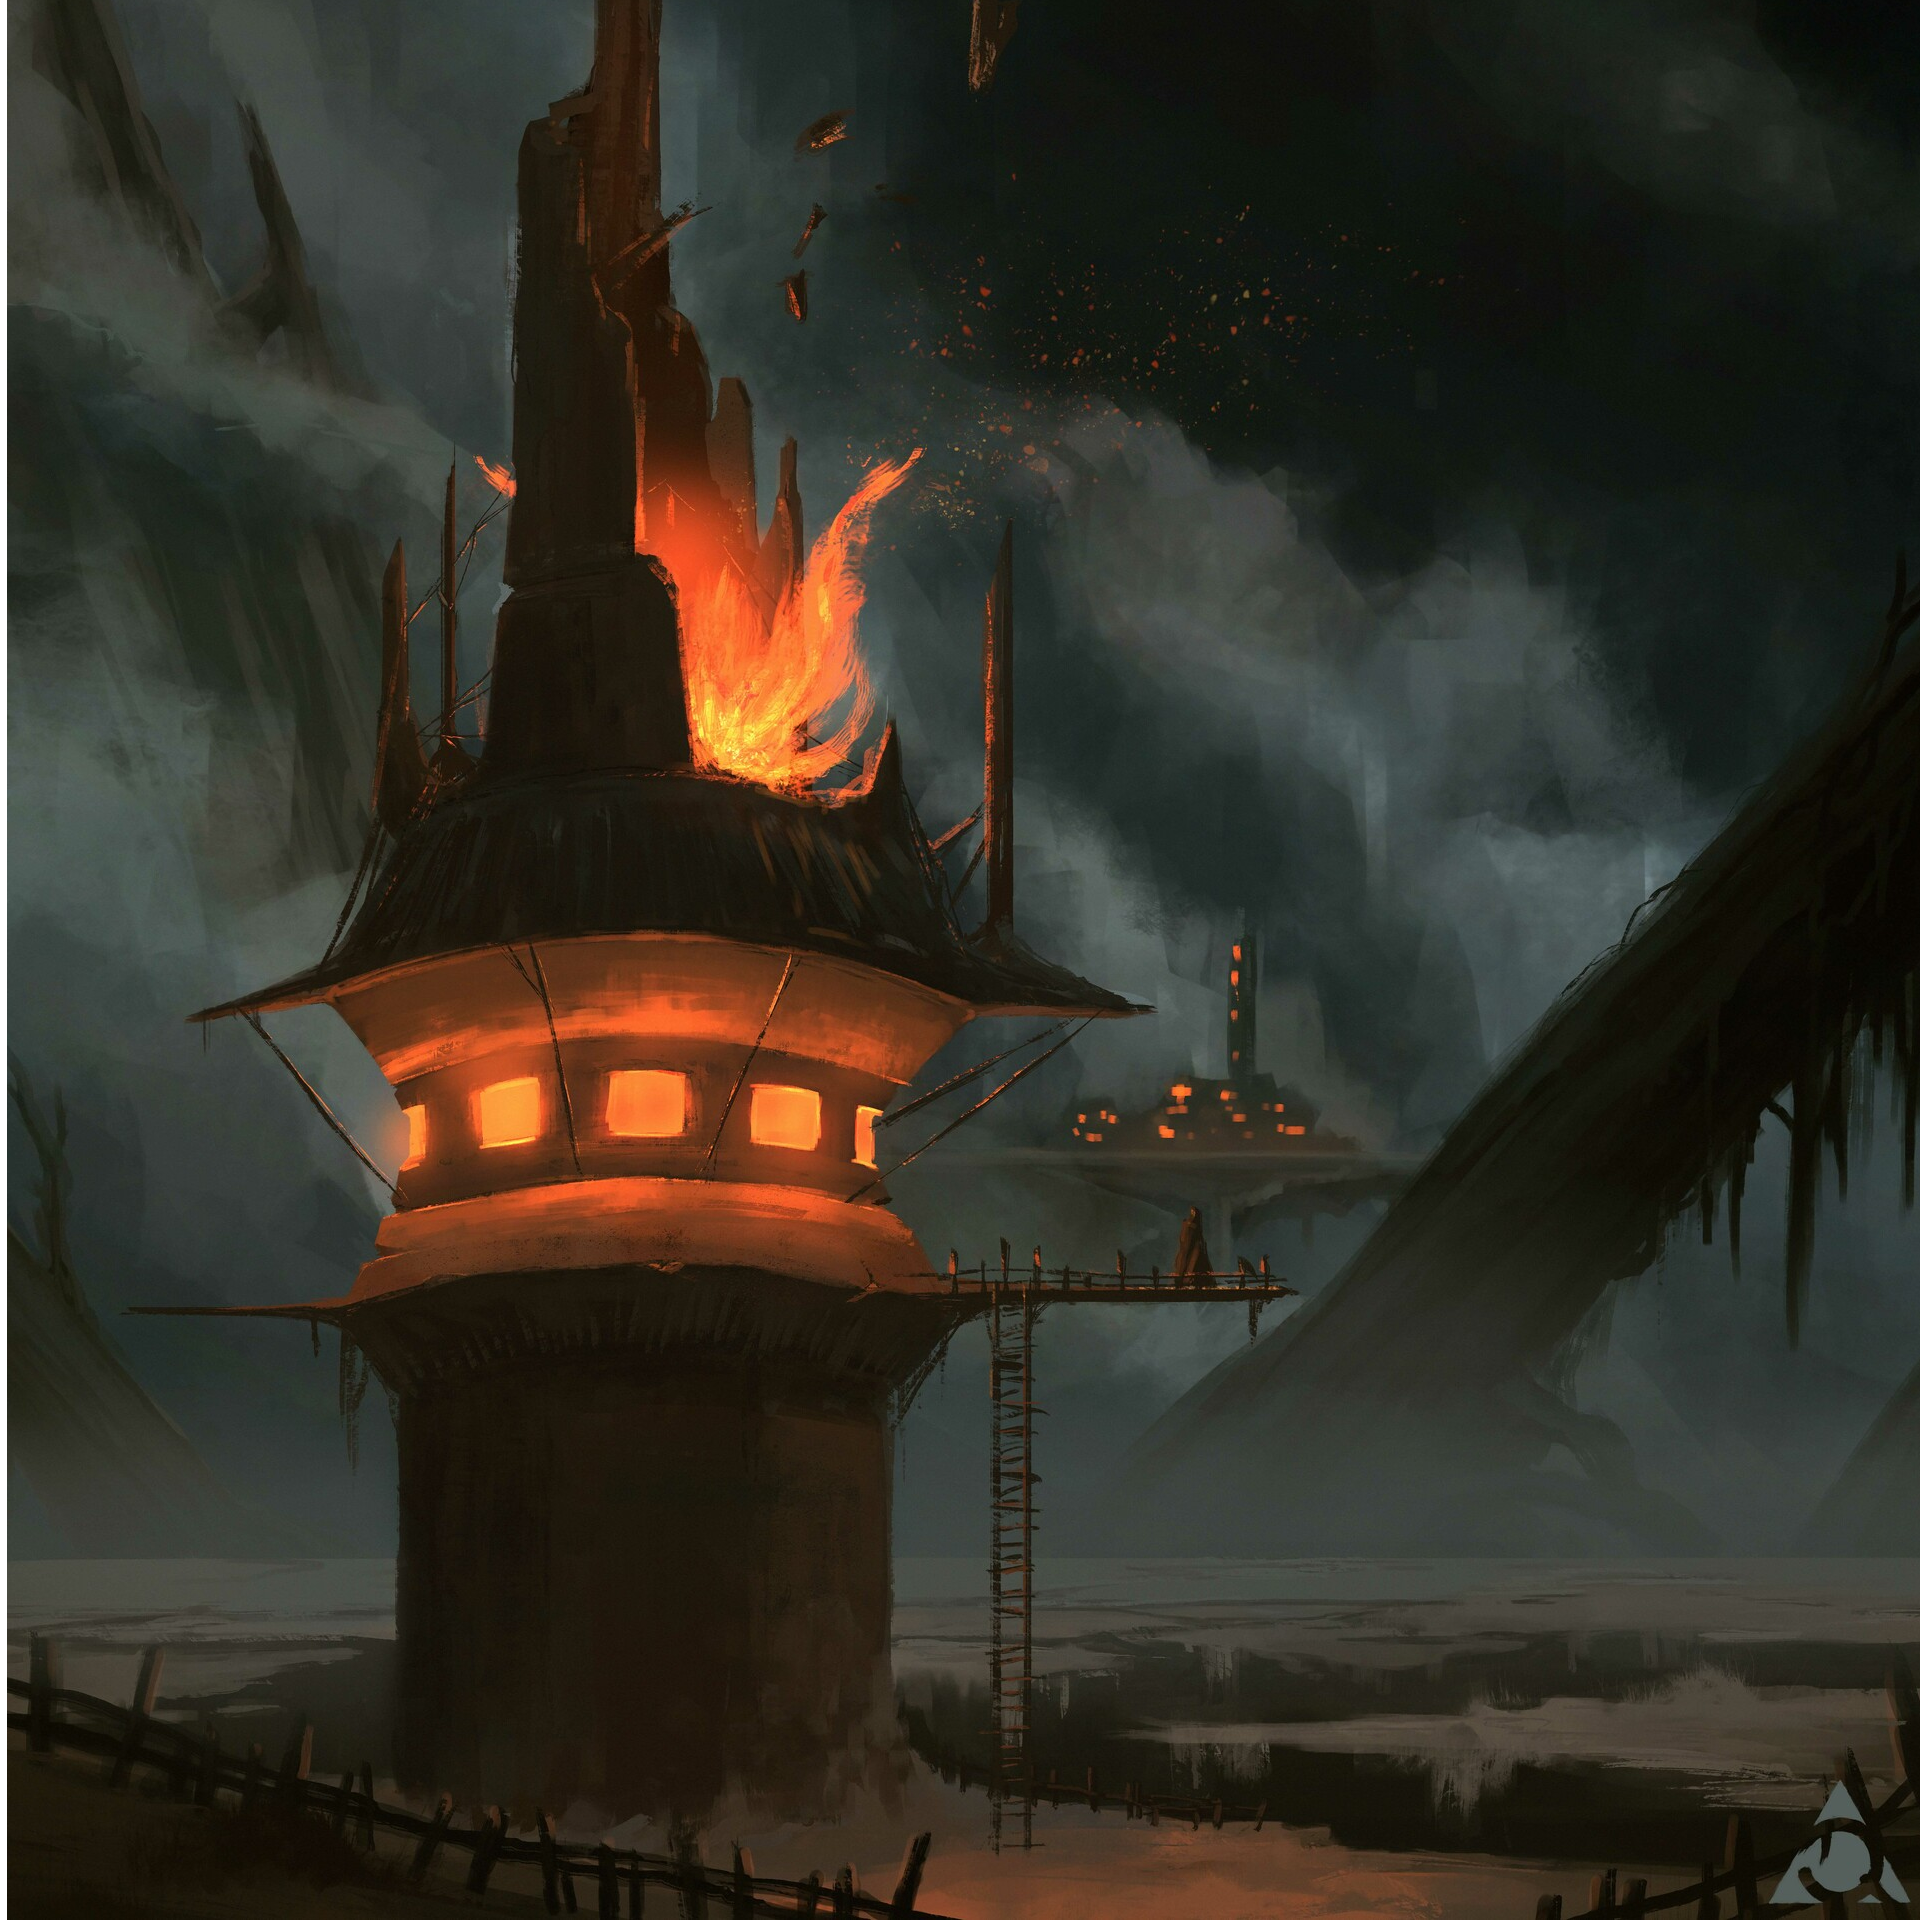 The Burning Tower